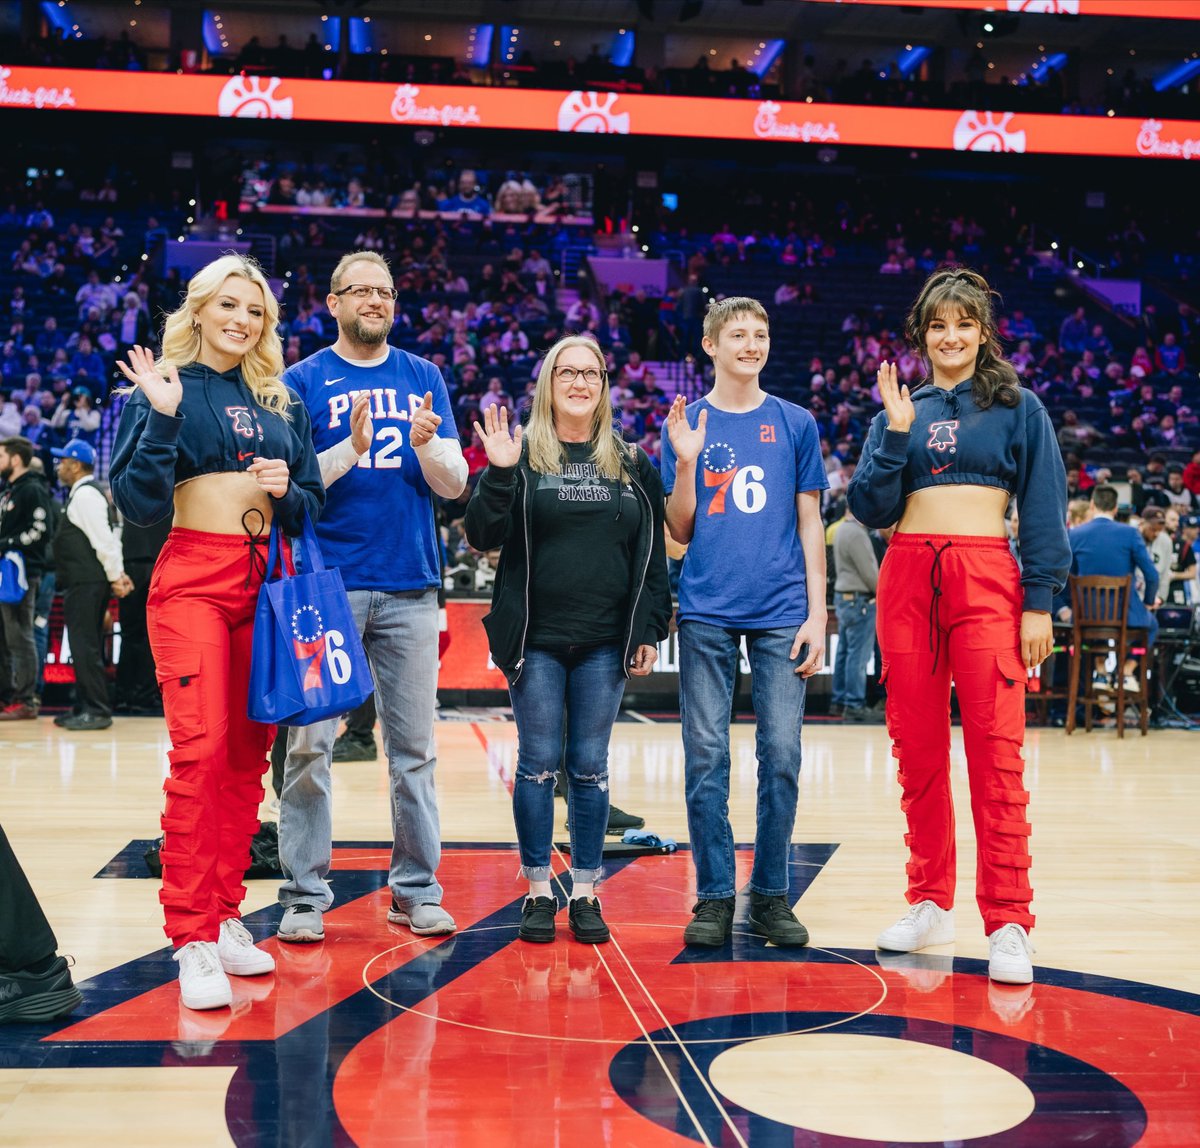 Thank you, Declan, our Caring Kid of the Game, presented by @ChickfilA. Declan started a sock drive & collected 1,000 pairs of socks, which turned into Declan’s Socks for the Streets, aimed at helping people experiencing homelessness in the greater Northeast area. 💙❤️